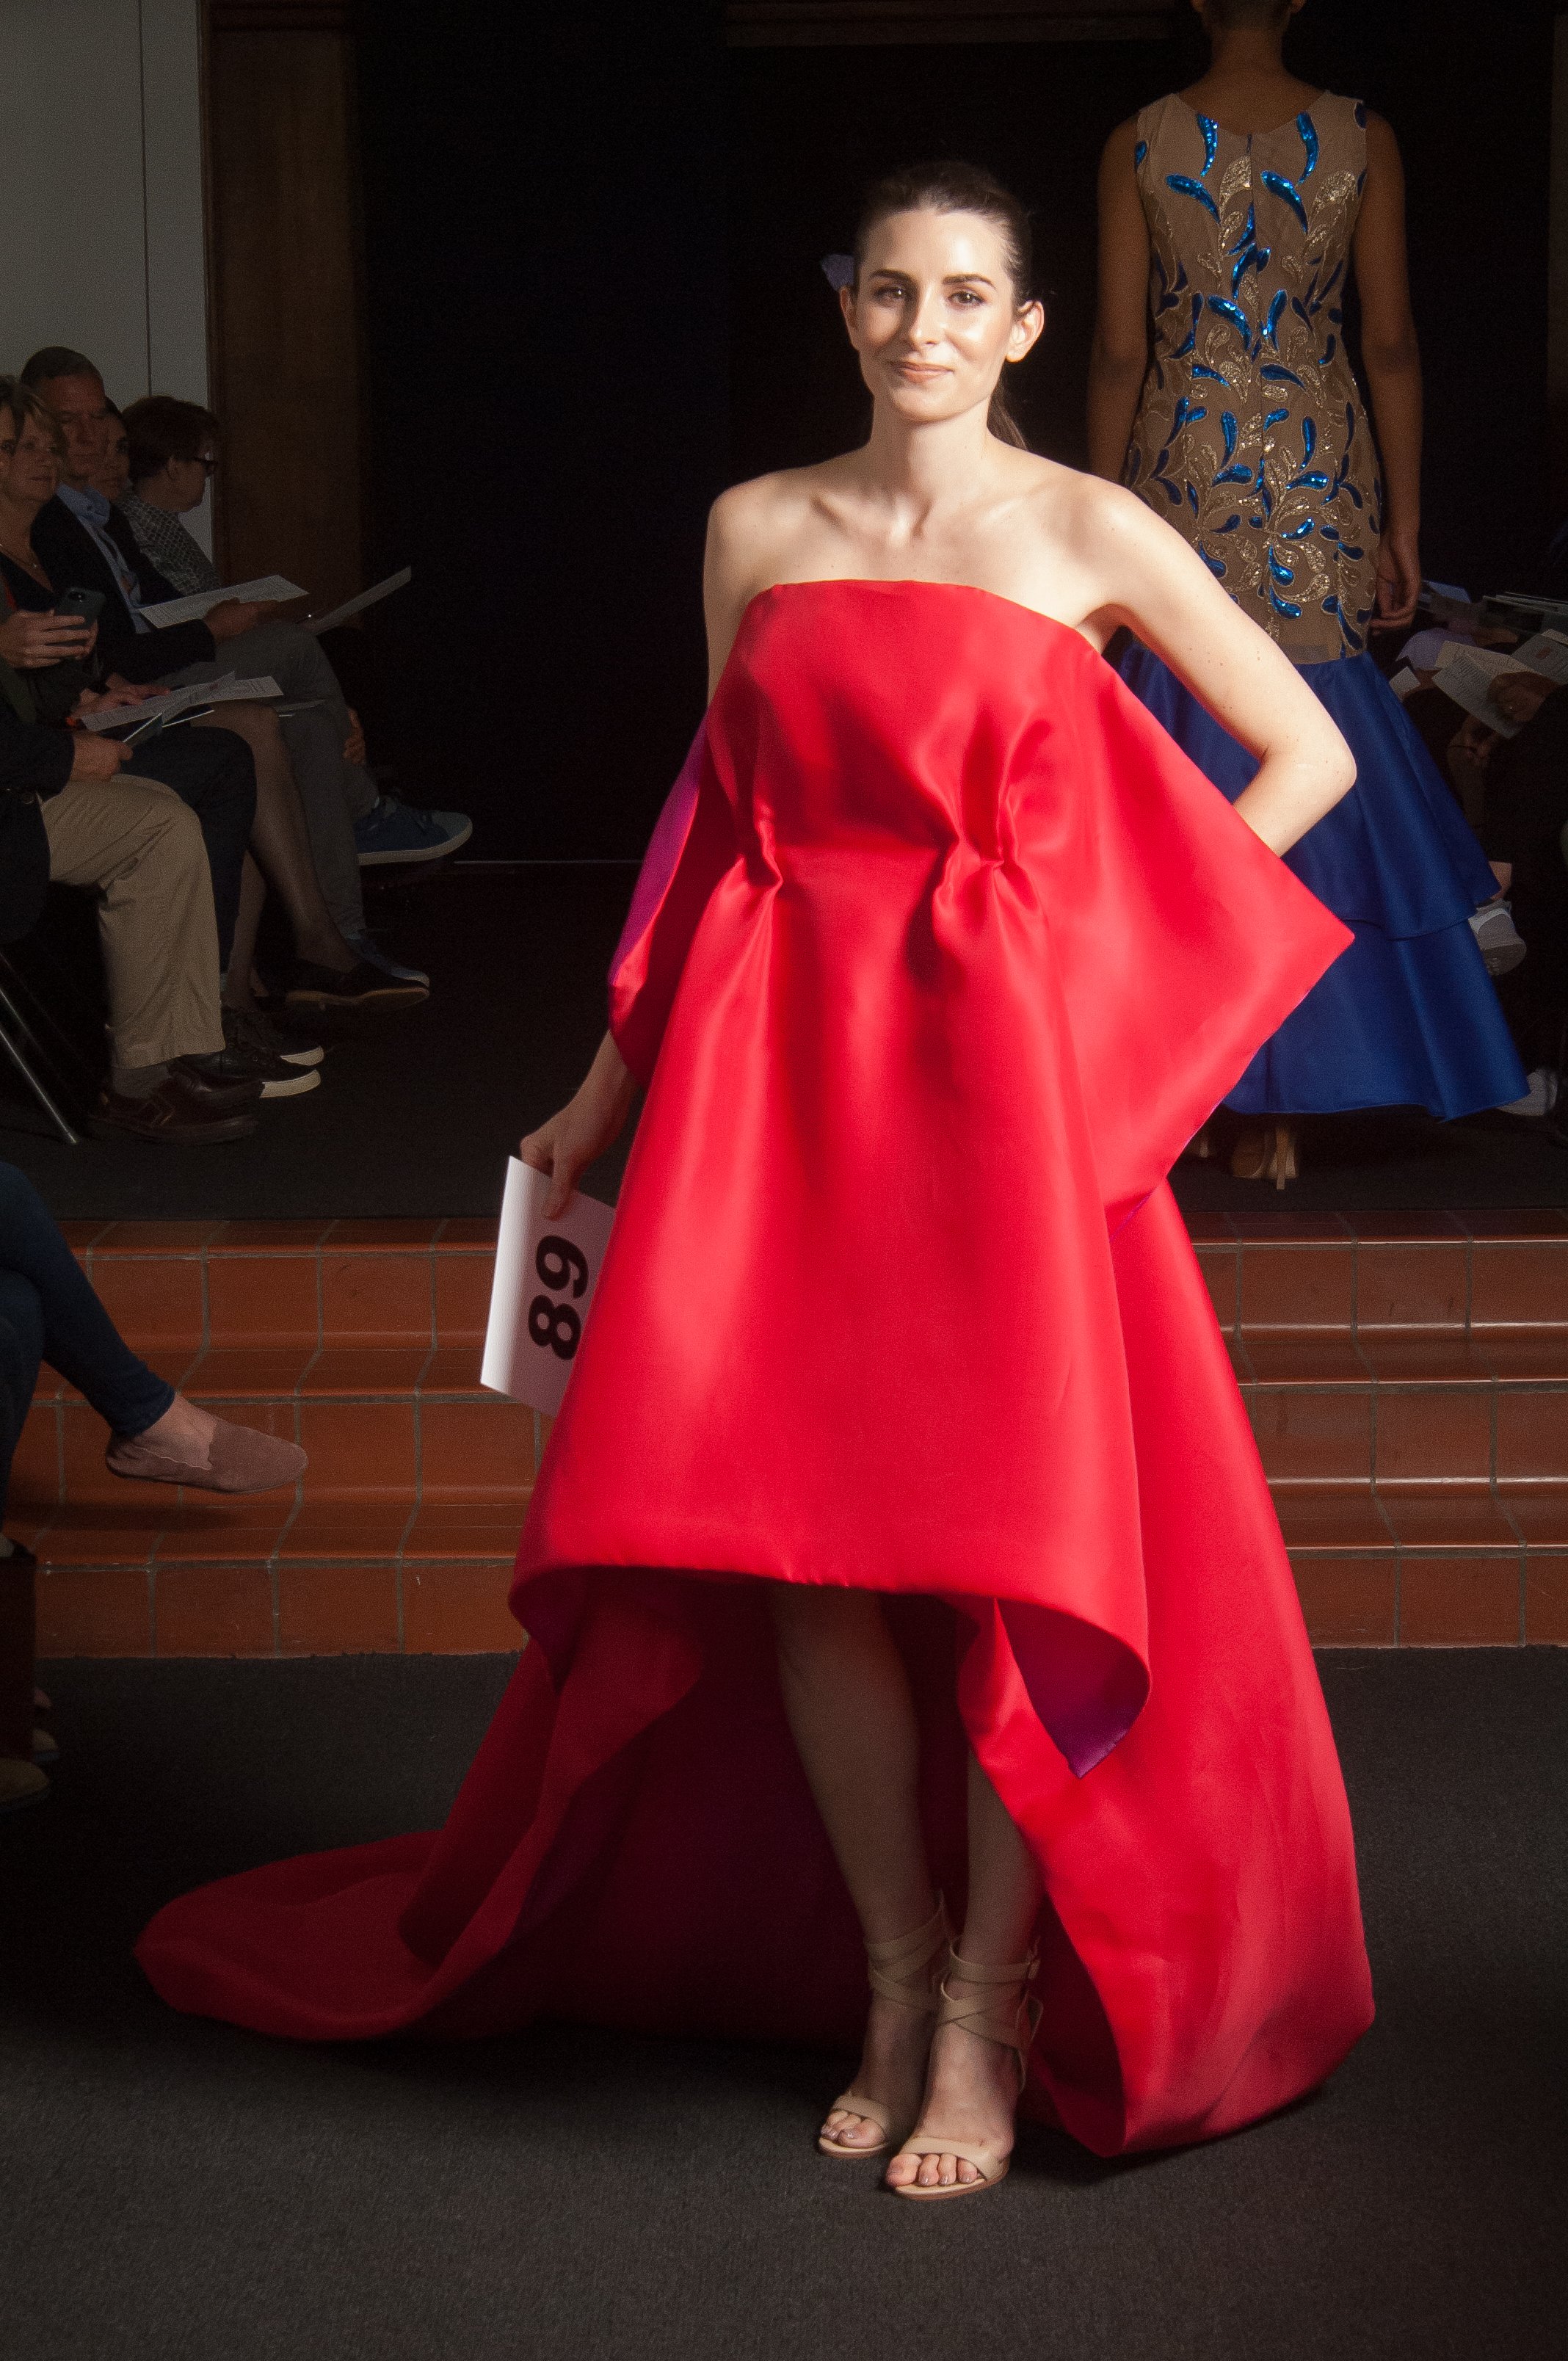 Model wearing bright red, strapless, high-low dress.